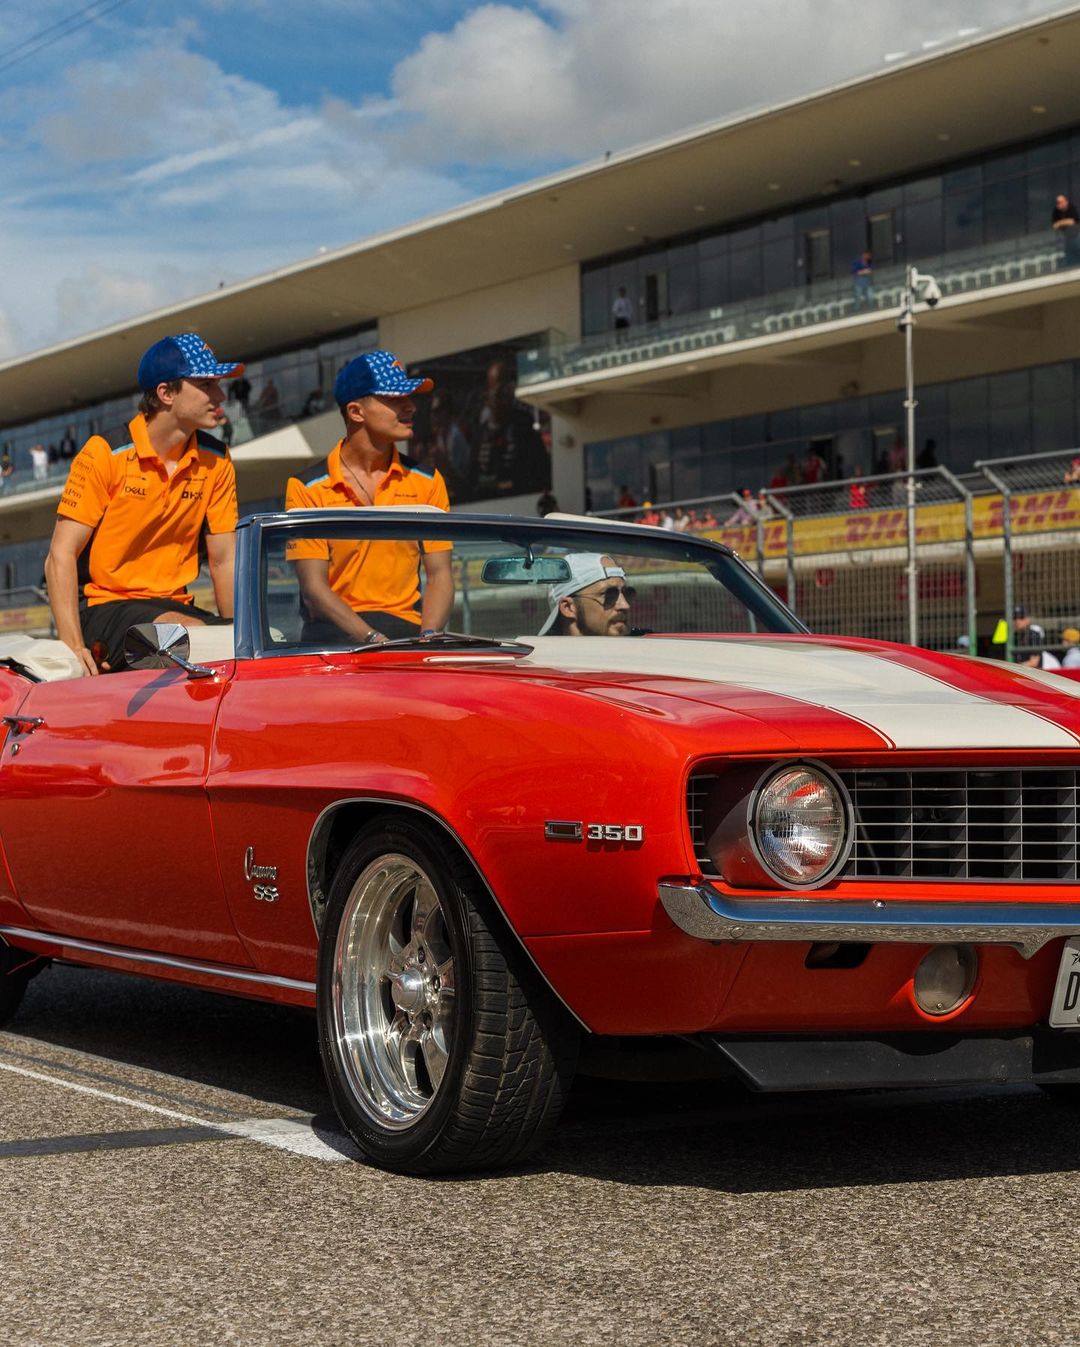 Two people in orange shirts and blue caps standing next to a classic red Chevrolet Camaro SS at a racing event organized by Austin Realtor.